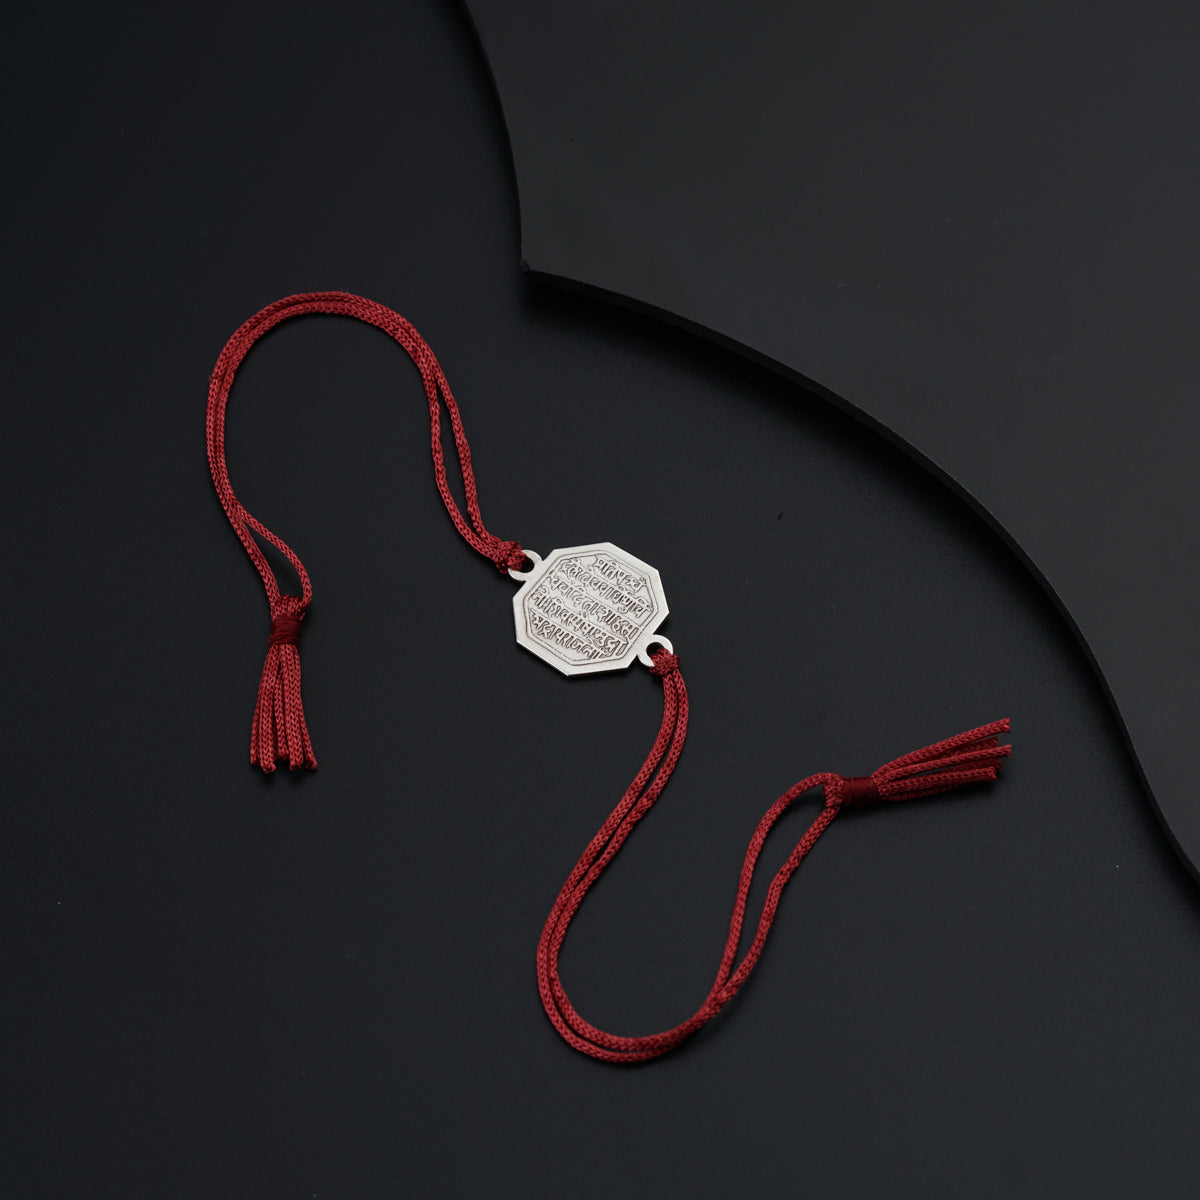 a red string with a tag attached to it